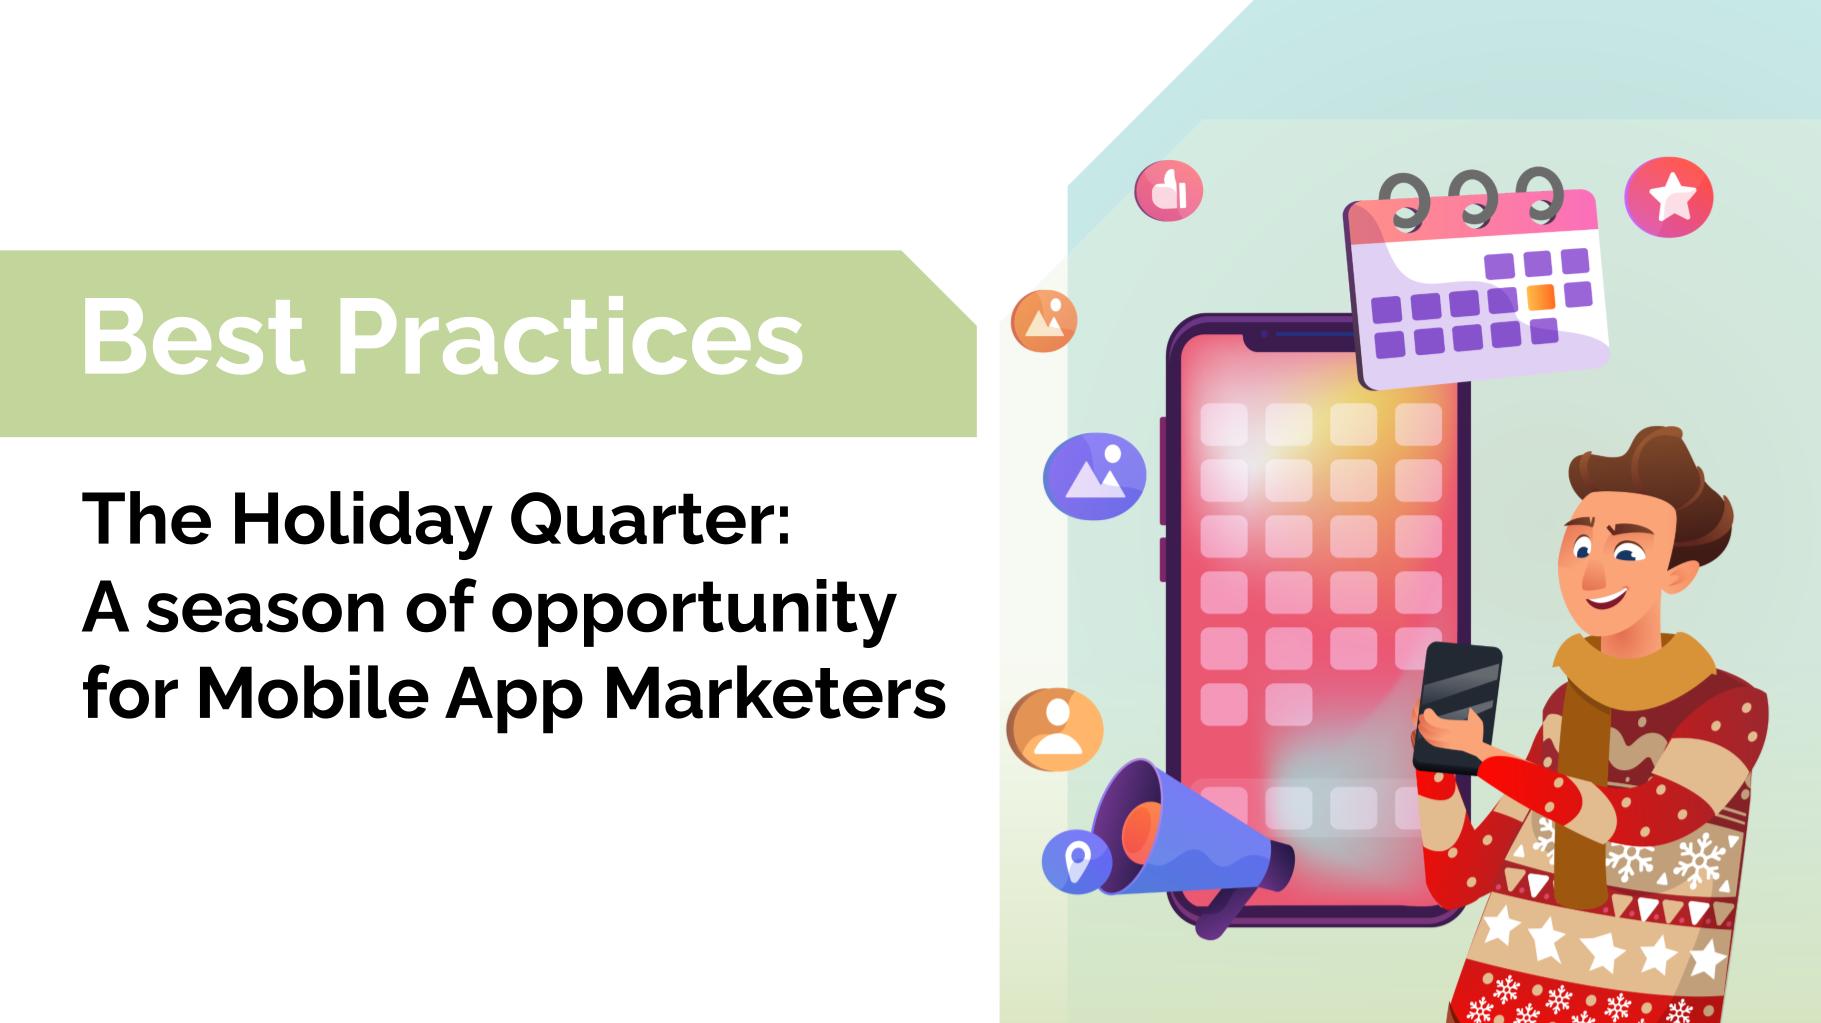 The Holiday Quarter: A Season of Opportunity for Mobile App Marketers